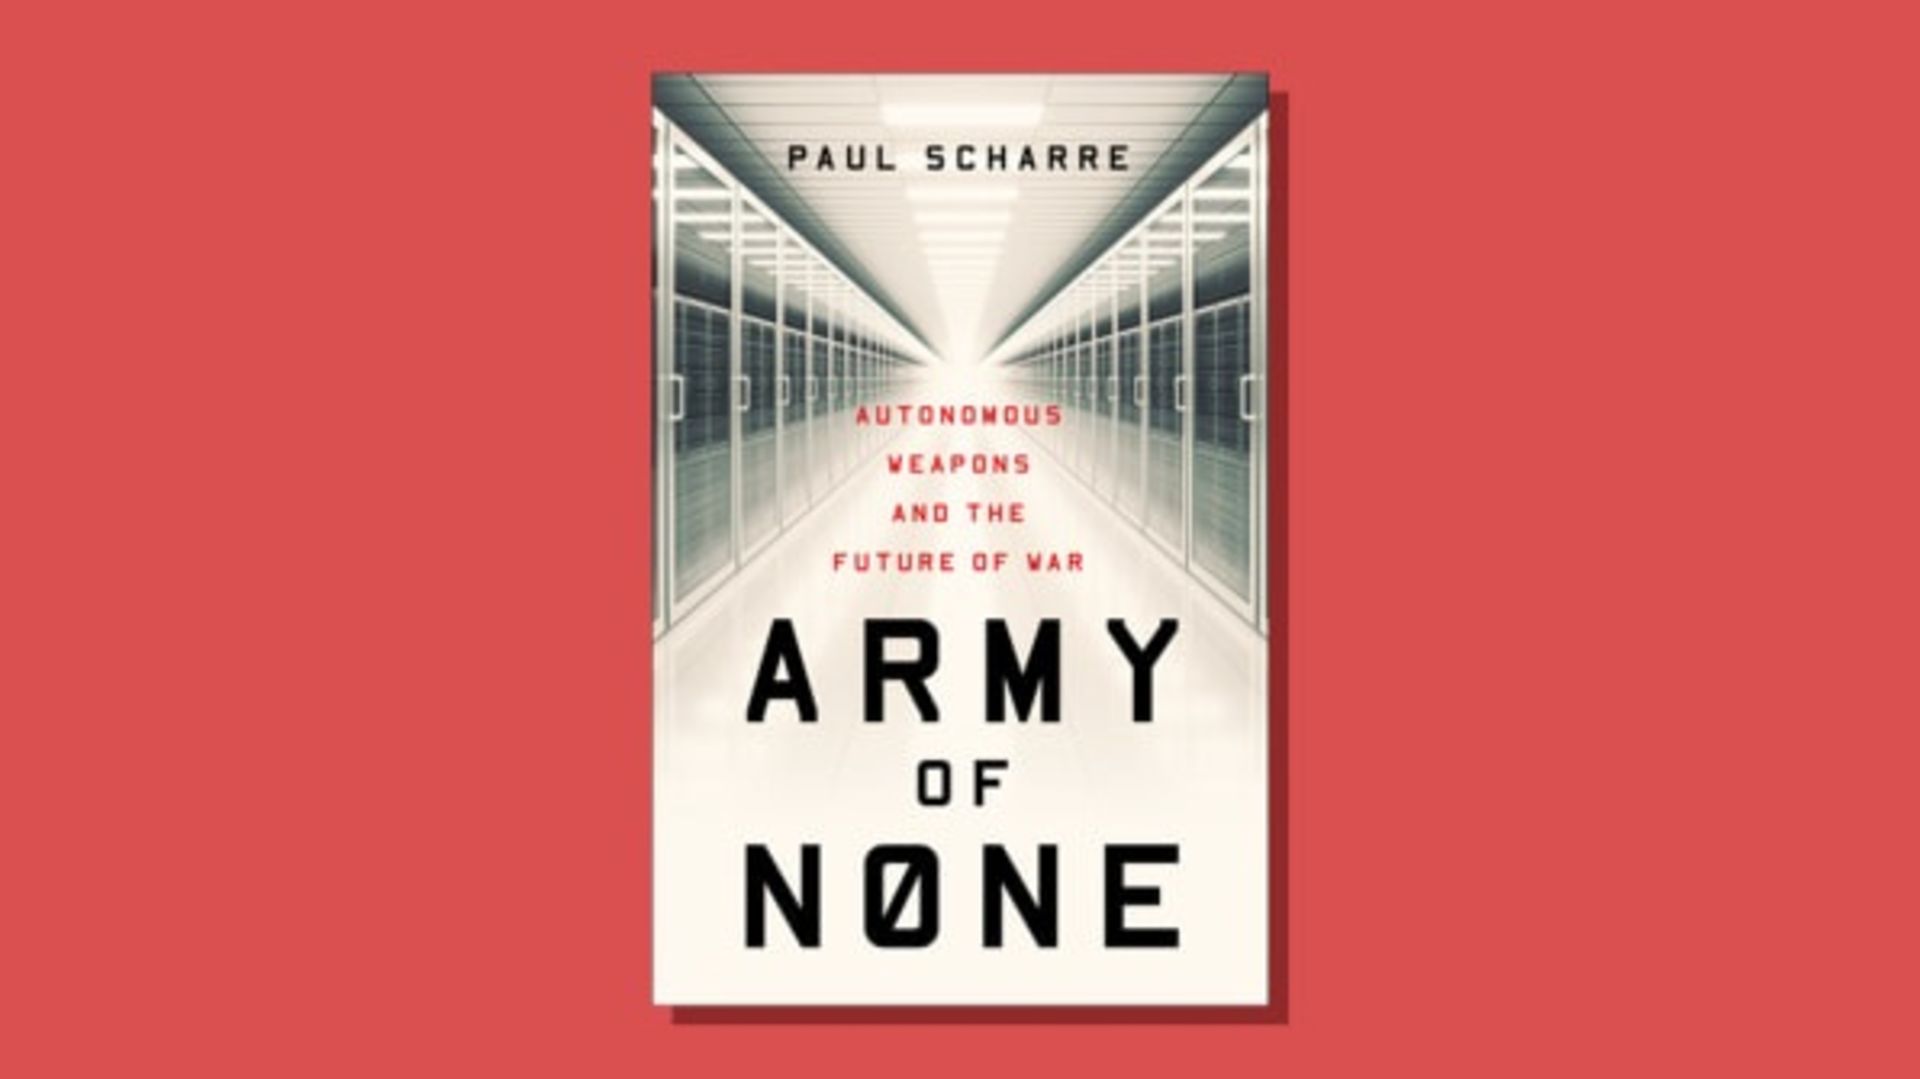 Army of None, by Paul Scharre